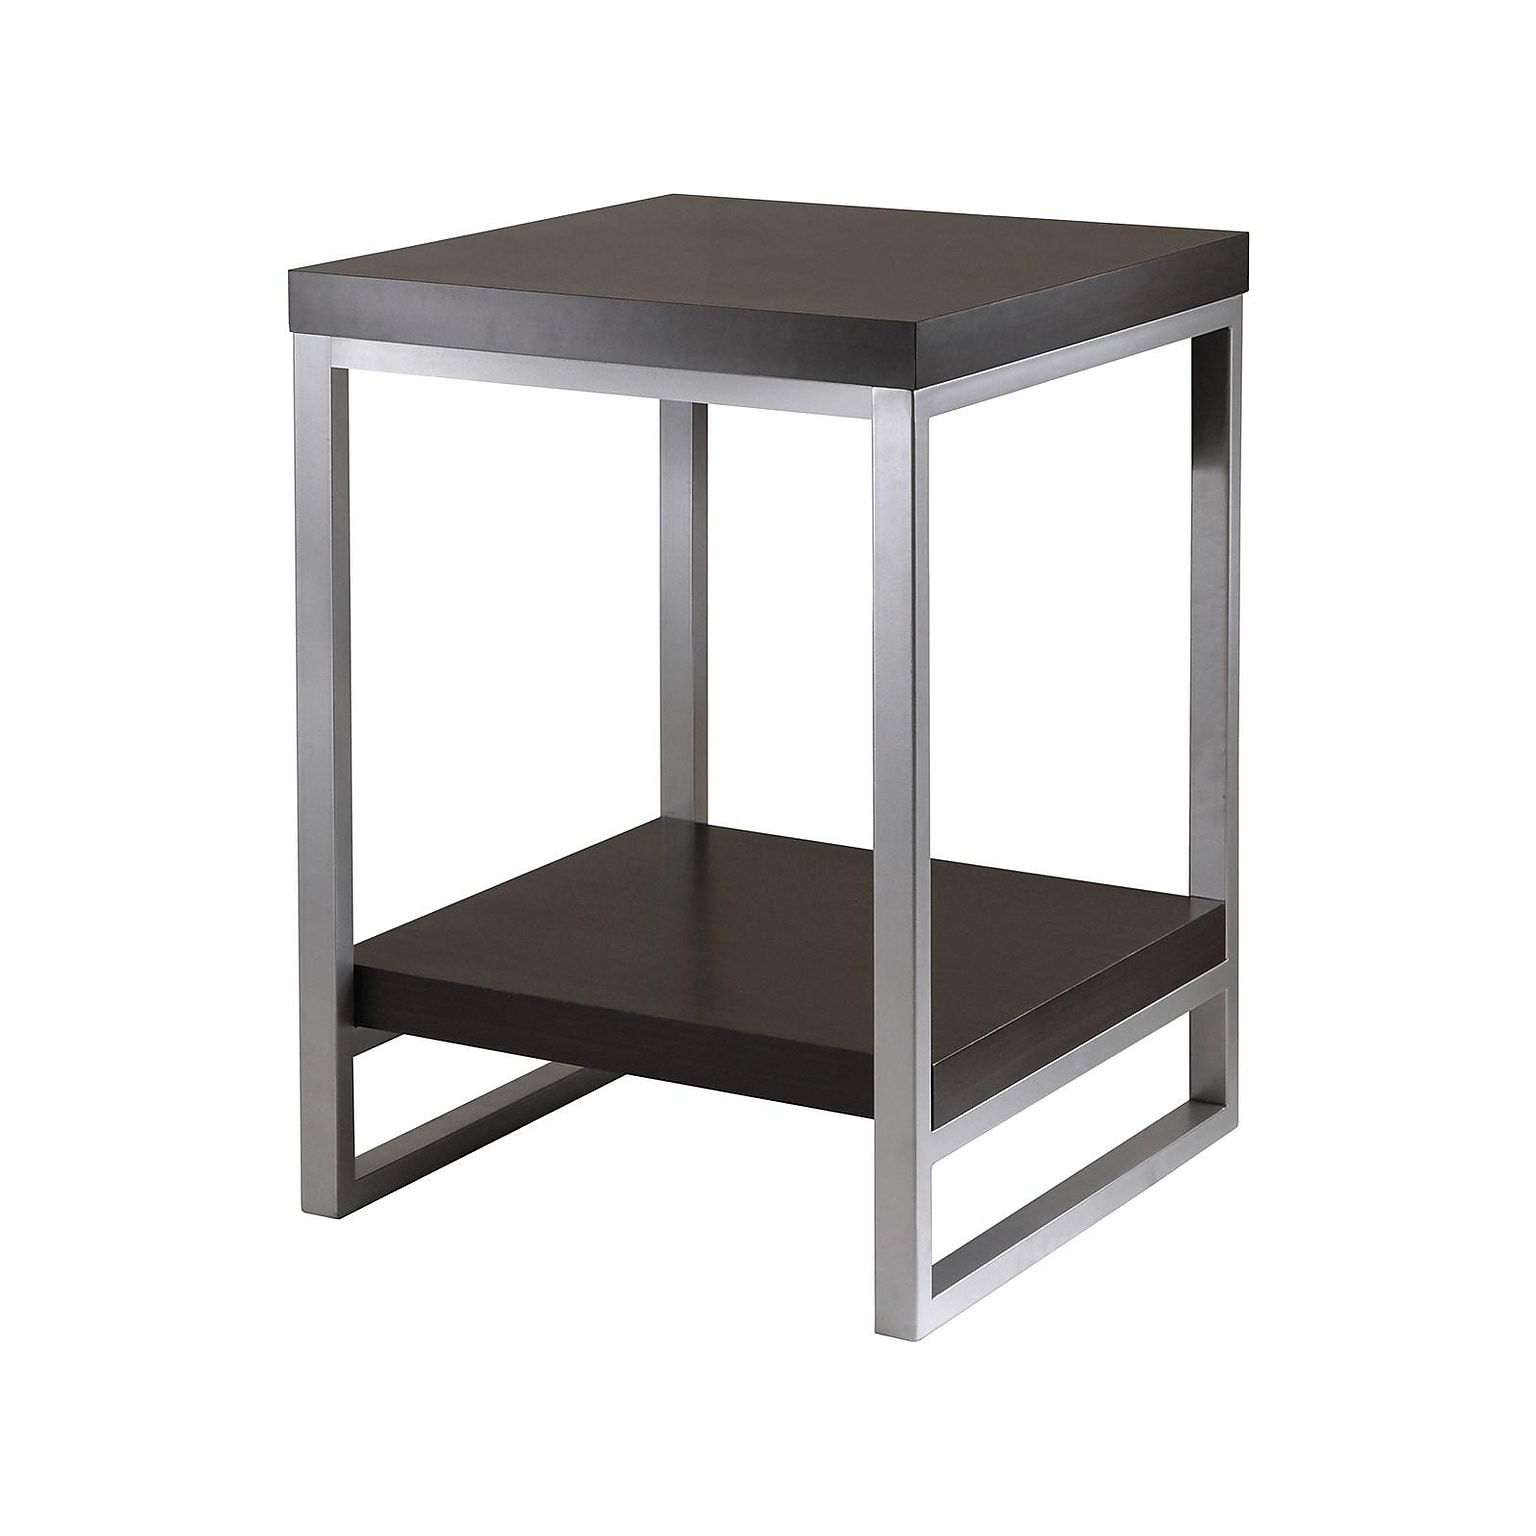 Winsome Jared 18W x 18D End Table, Espresso (93418)